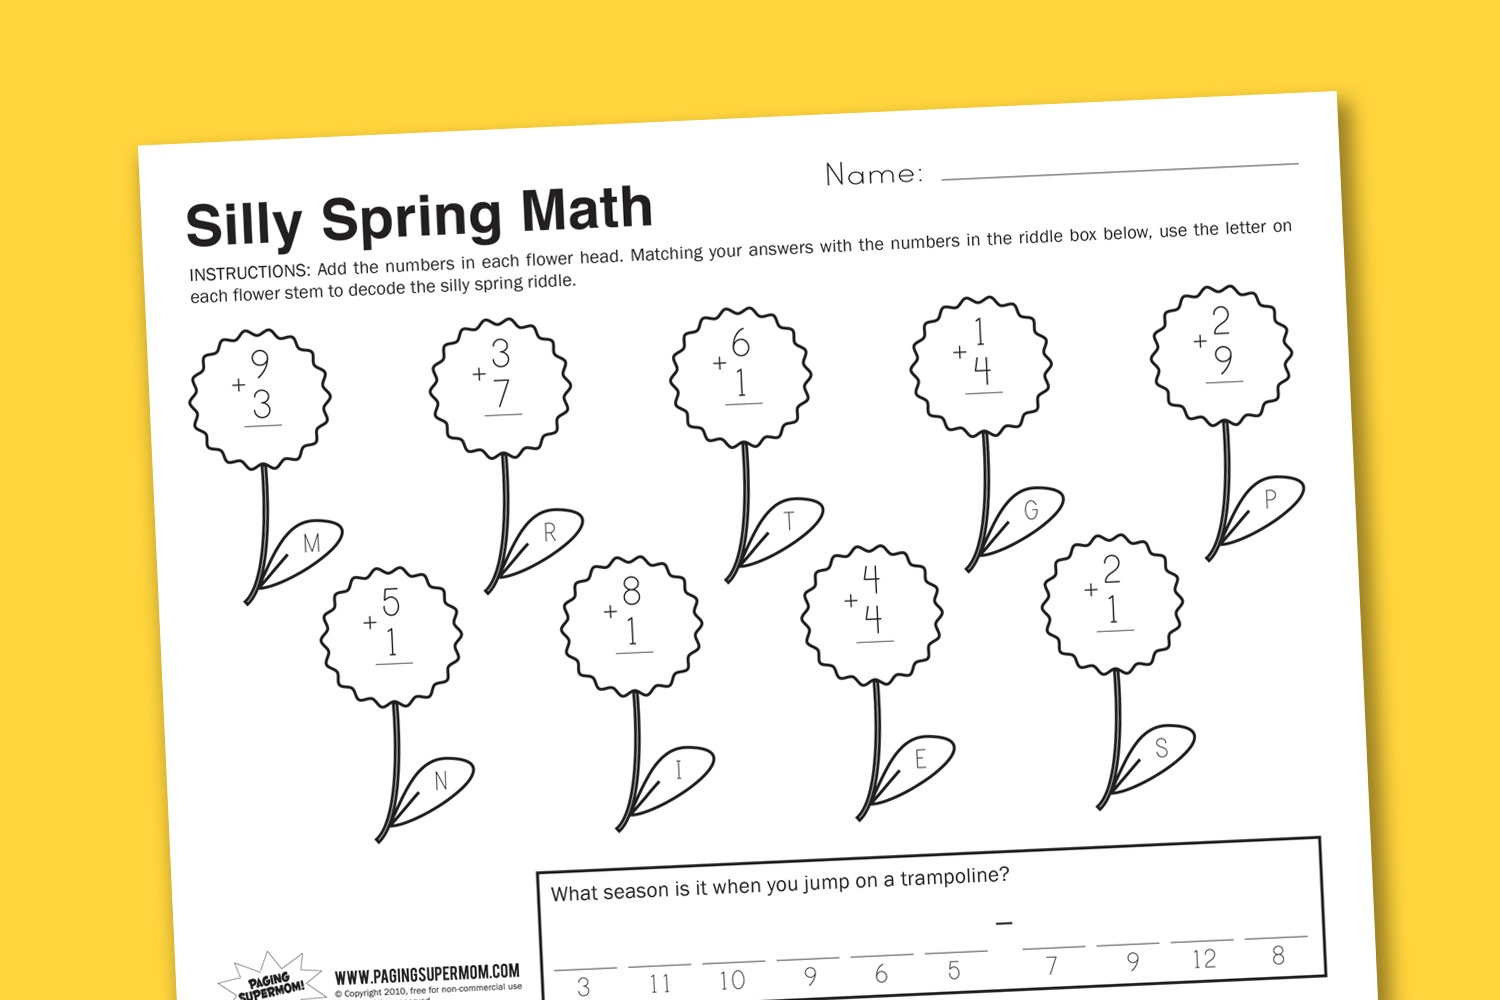 Worksheet Wednesday: Silly Spring Math - Paging Supermom - Free Printable Homework Worksheets